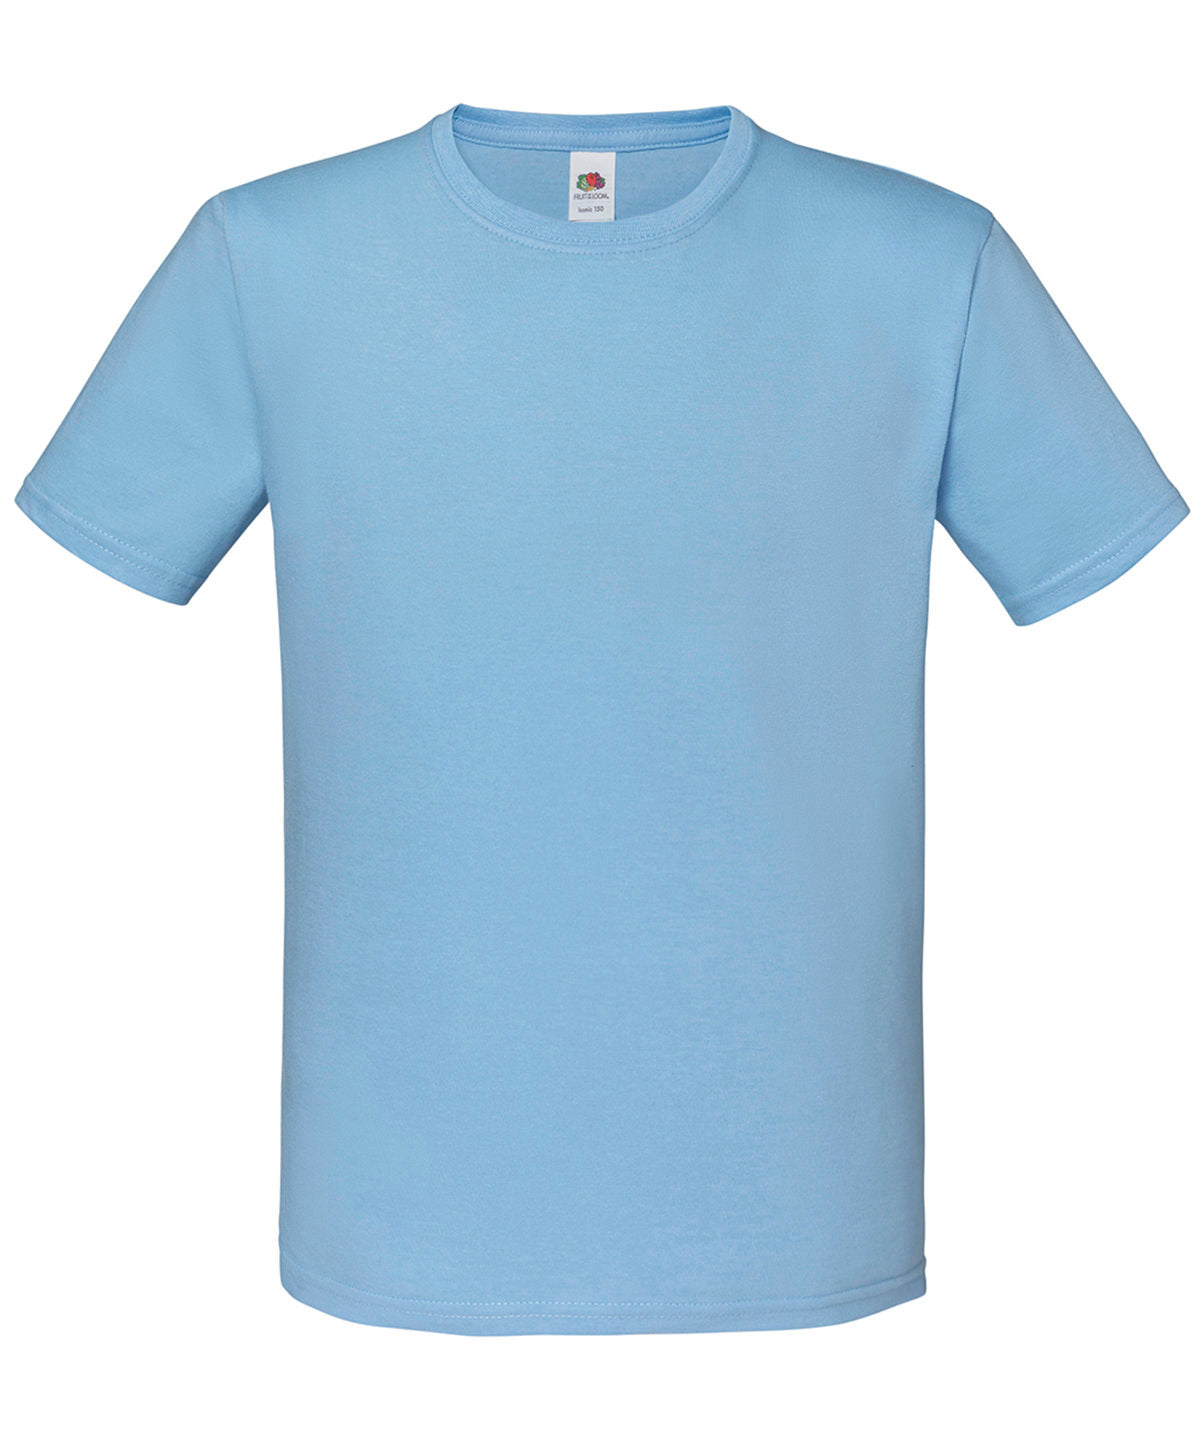 Fruit of the Loom Kids iconic 150 T Sky Blue